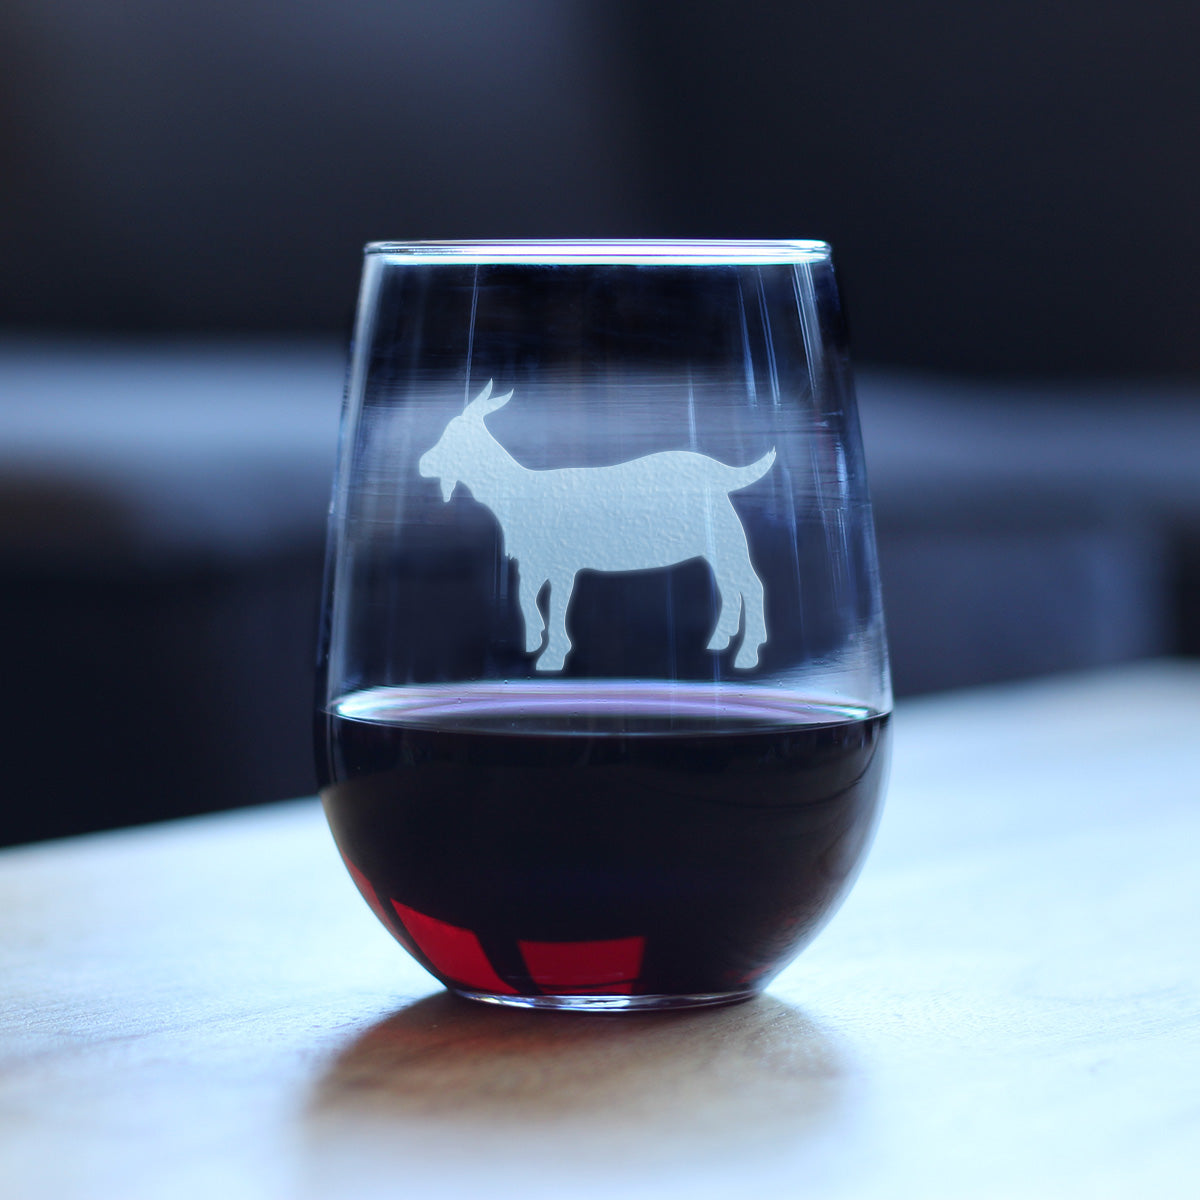 Goat Stemless Wine Glass - Cute Funny Farm Animal Themed Decor and Gifts for Goat Lovers - Large 17 Oz